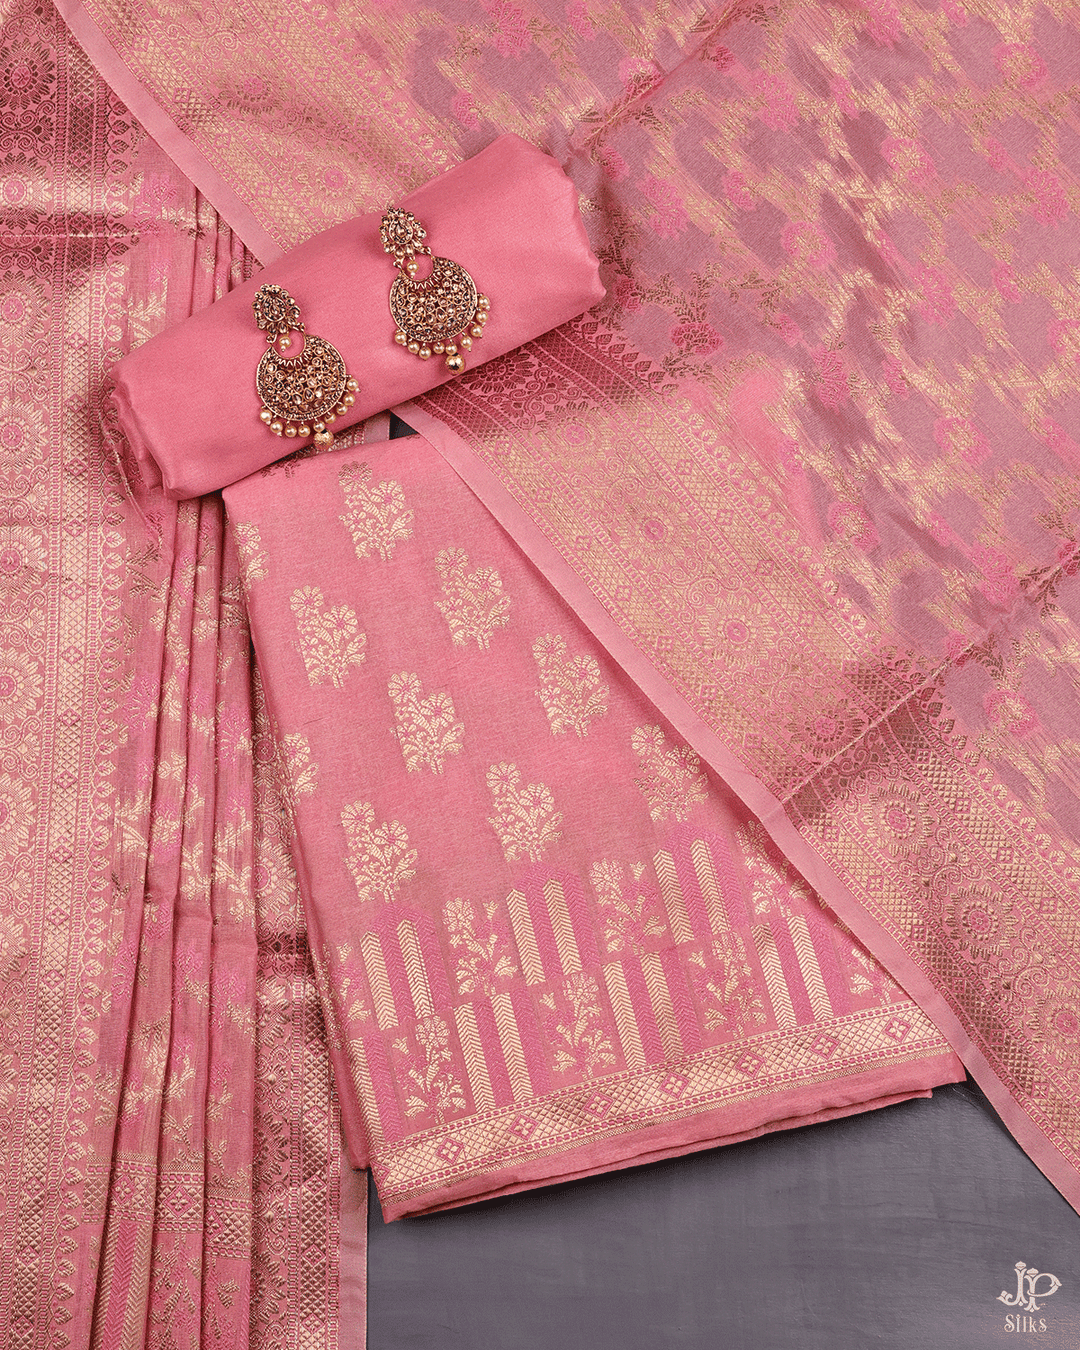 Baby Pink Unstitched Chudidhar Material - D5289 - View 1